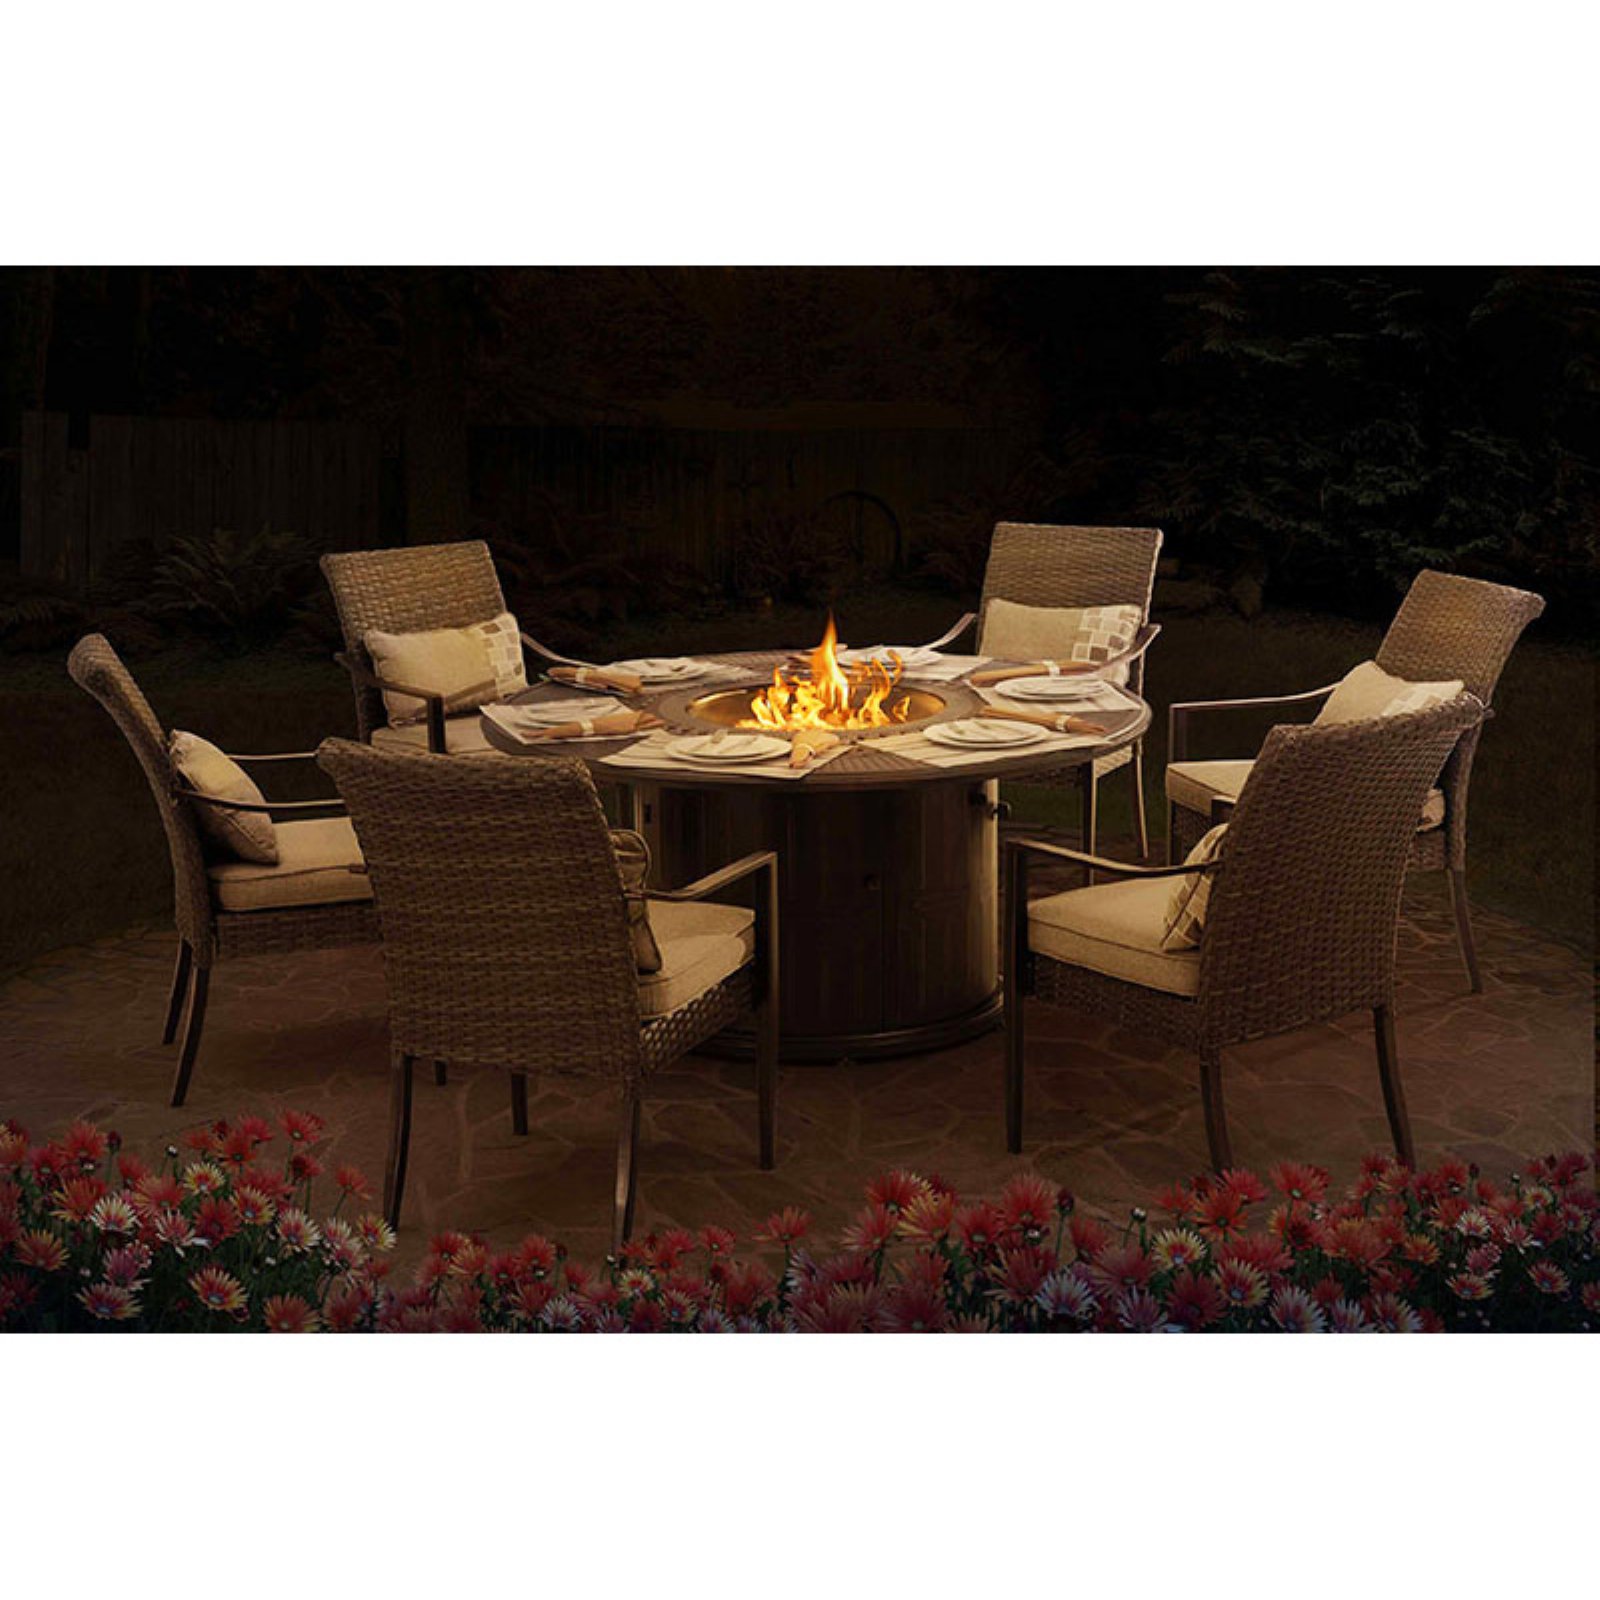 Sunjoy Simone Aluminum 7 Piece Fire Pit Set with Wicker Chairs - image 2 of 10